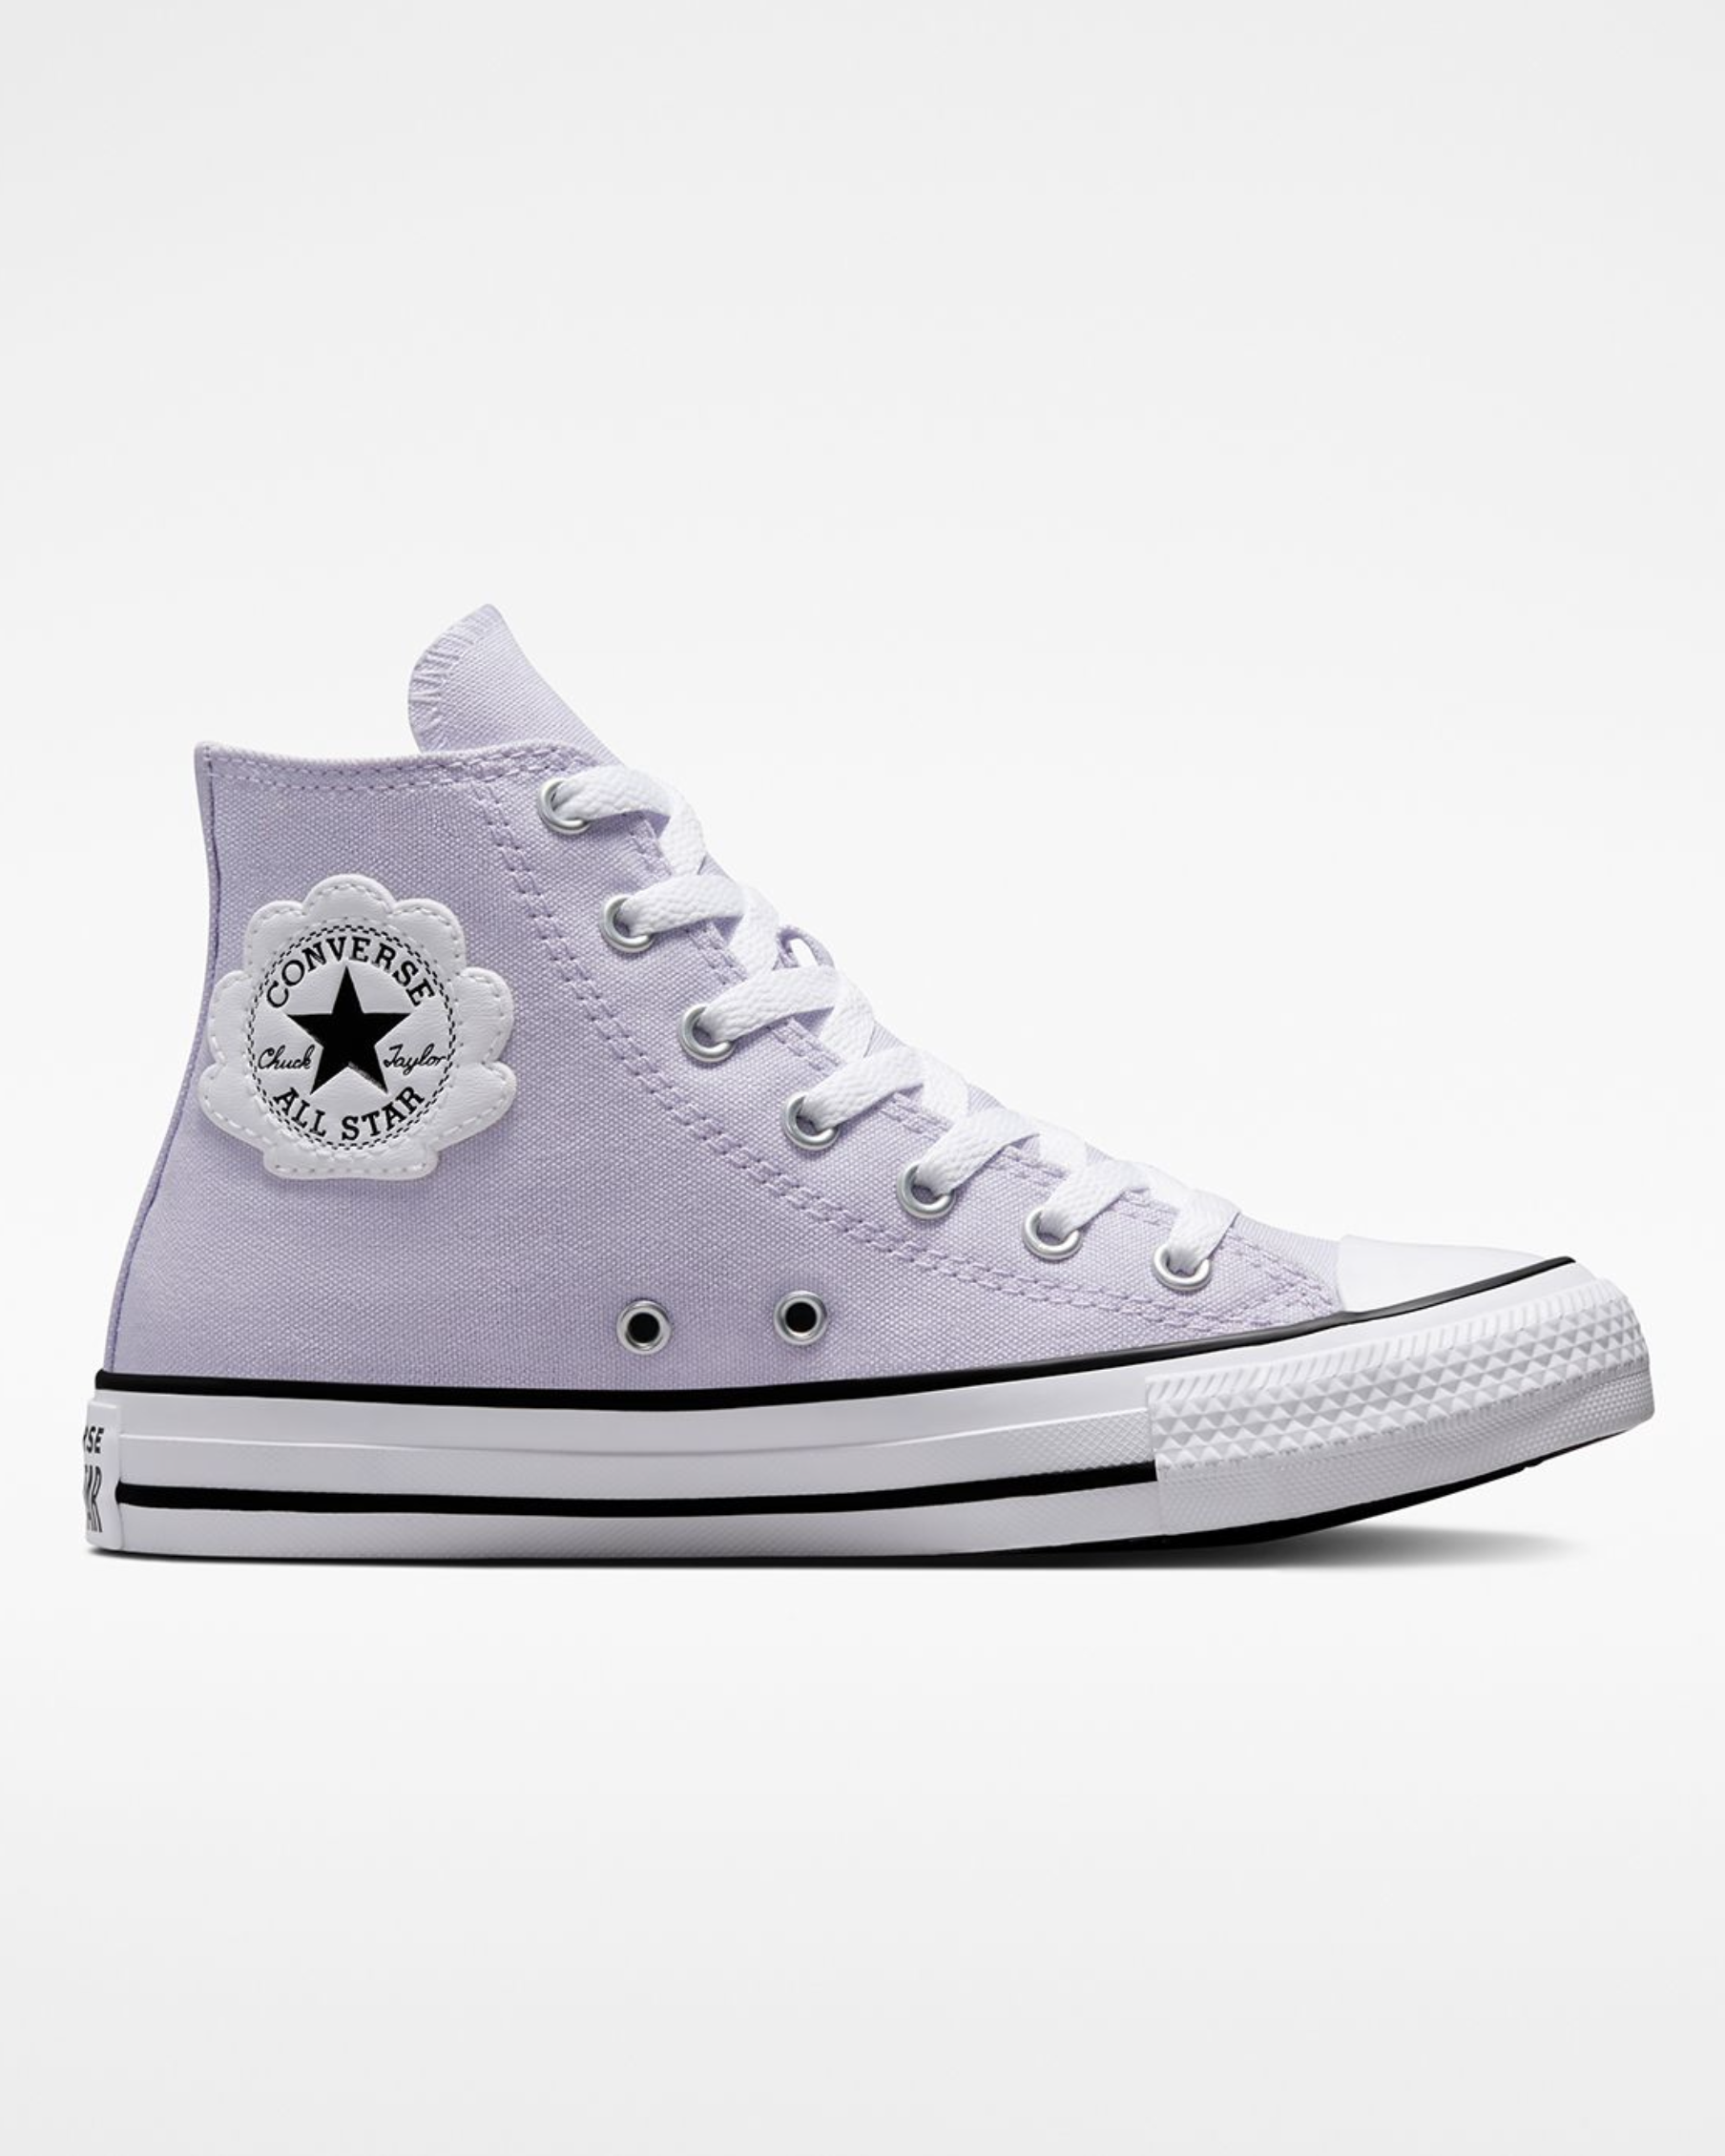 Converse Chuck Taylor Youth Majestic Mermaids High Top - Vapour Violet/White/Bl ack